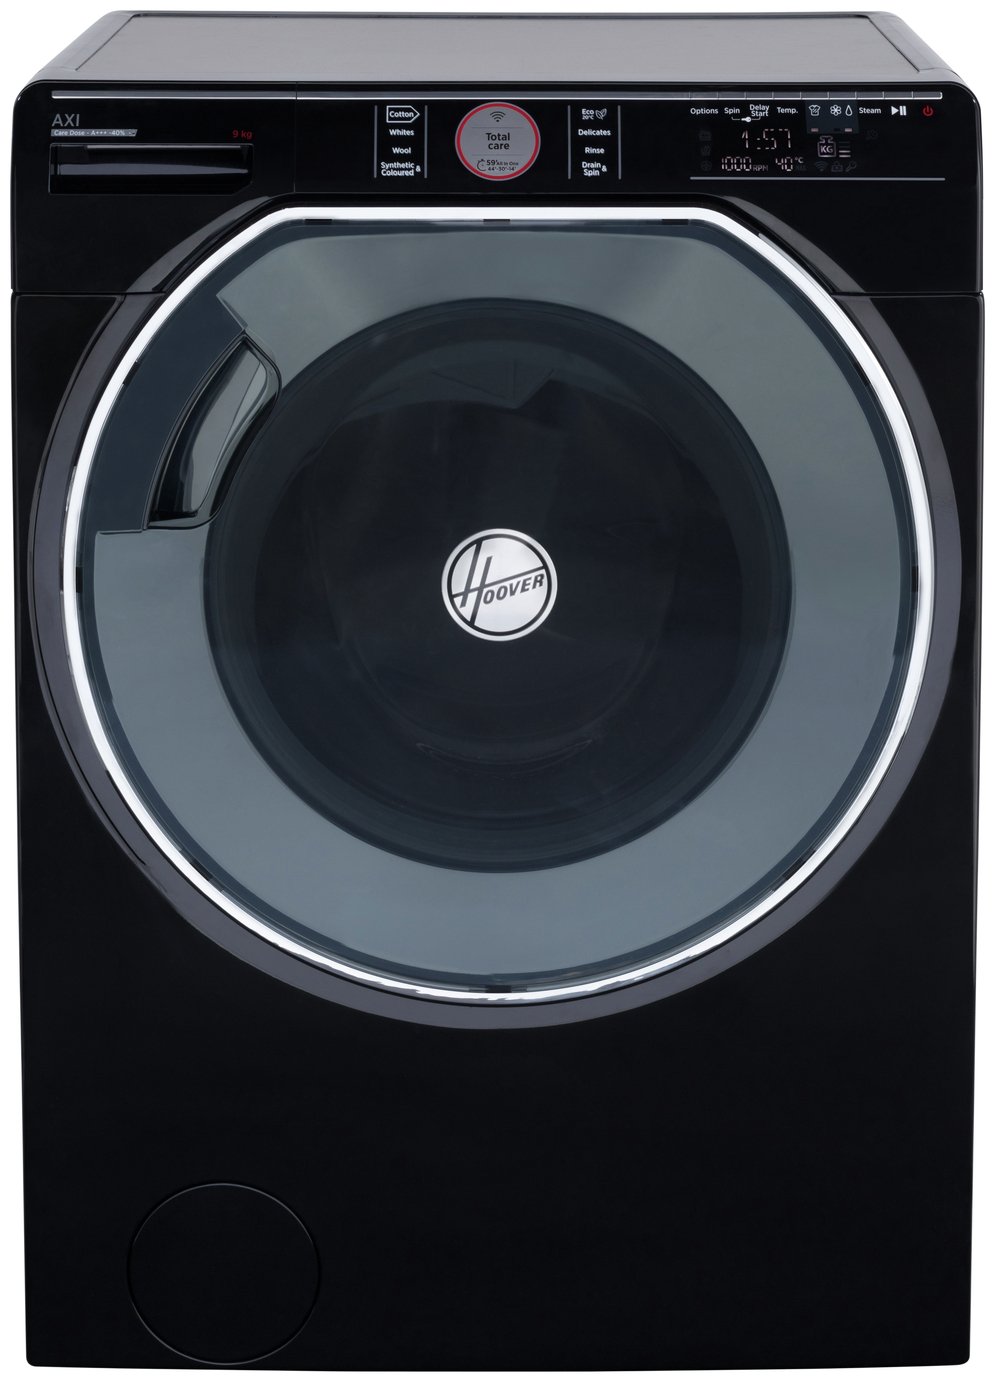 Hoover AXI AWMPD69LH7B 9KG 1600 Spin Washing Machine review